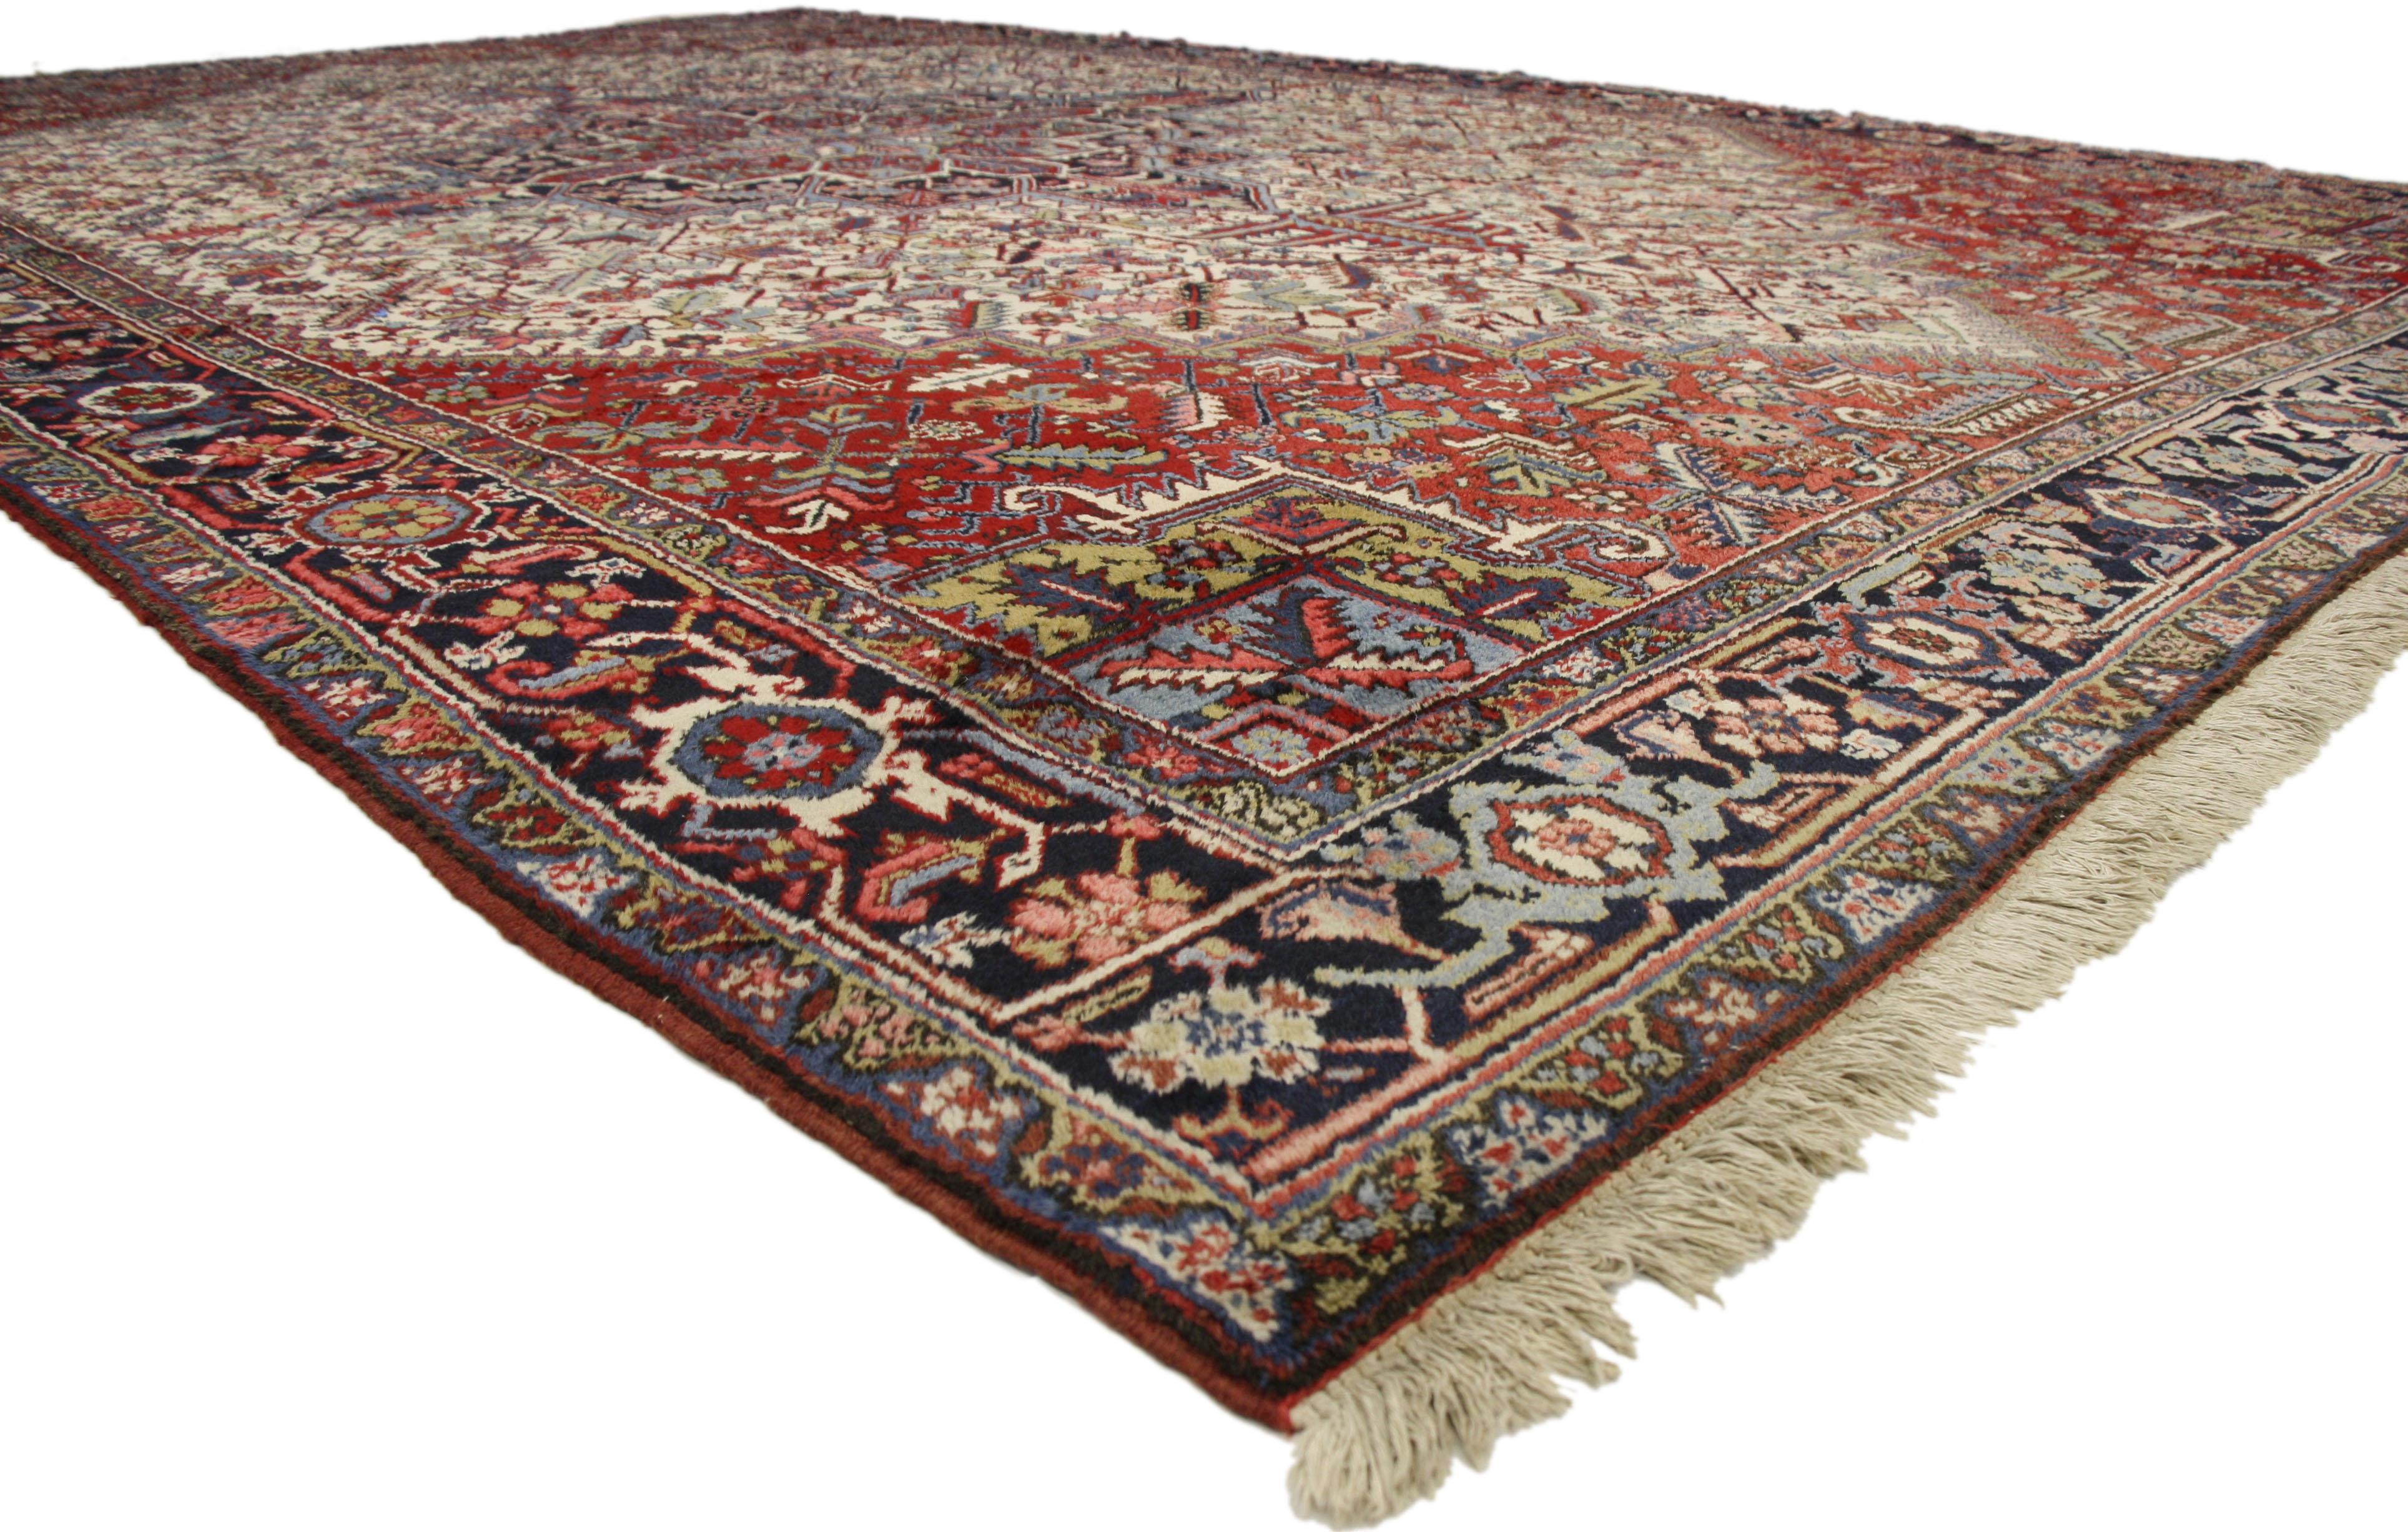 77175 Antique Persian Heriz Rug, 11'05 x 19'00.
Step into the world of elegance and sophistication with this exquisite hand knotted wool antique Persian Heriz rug. Its traditional and regal design is a true feast for the eyes, boasting brilliant